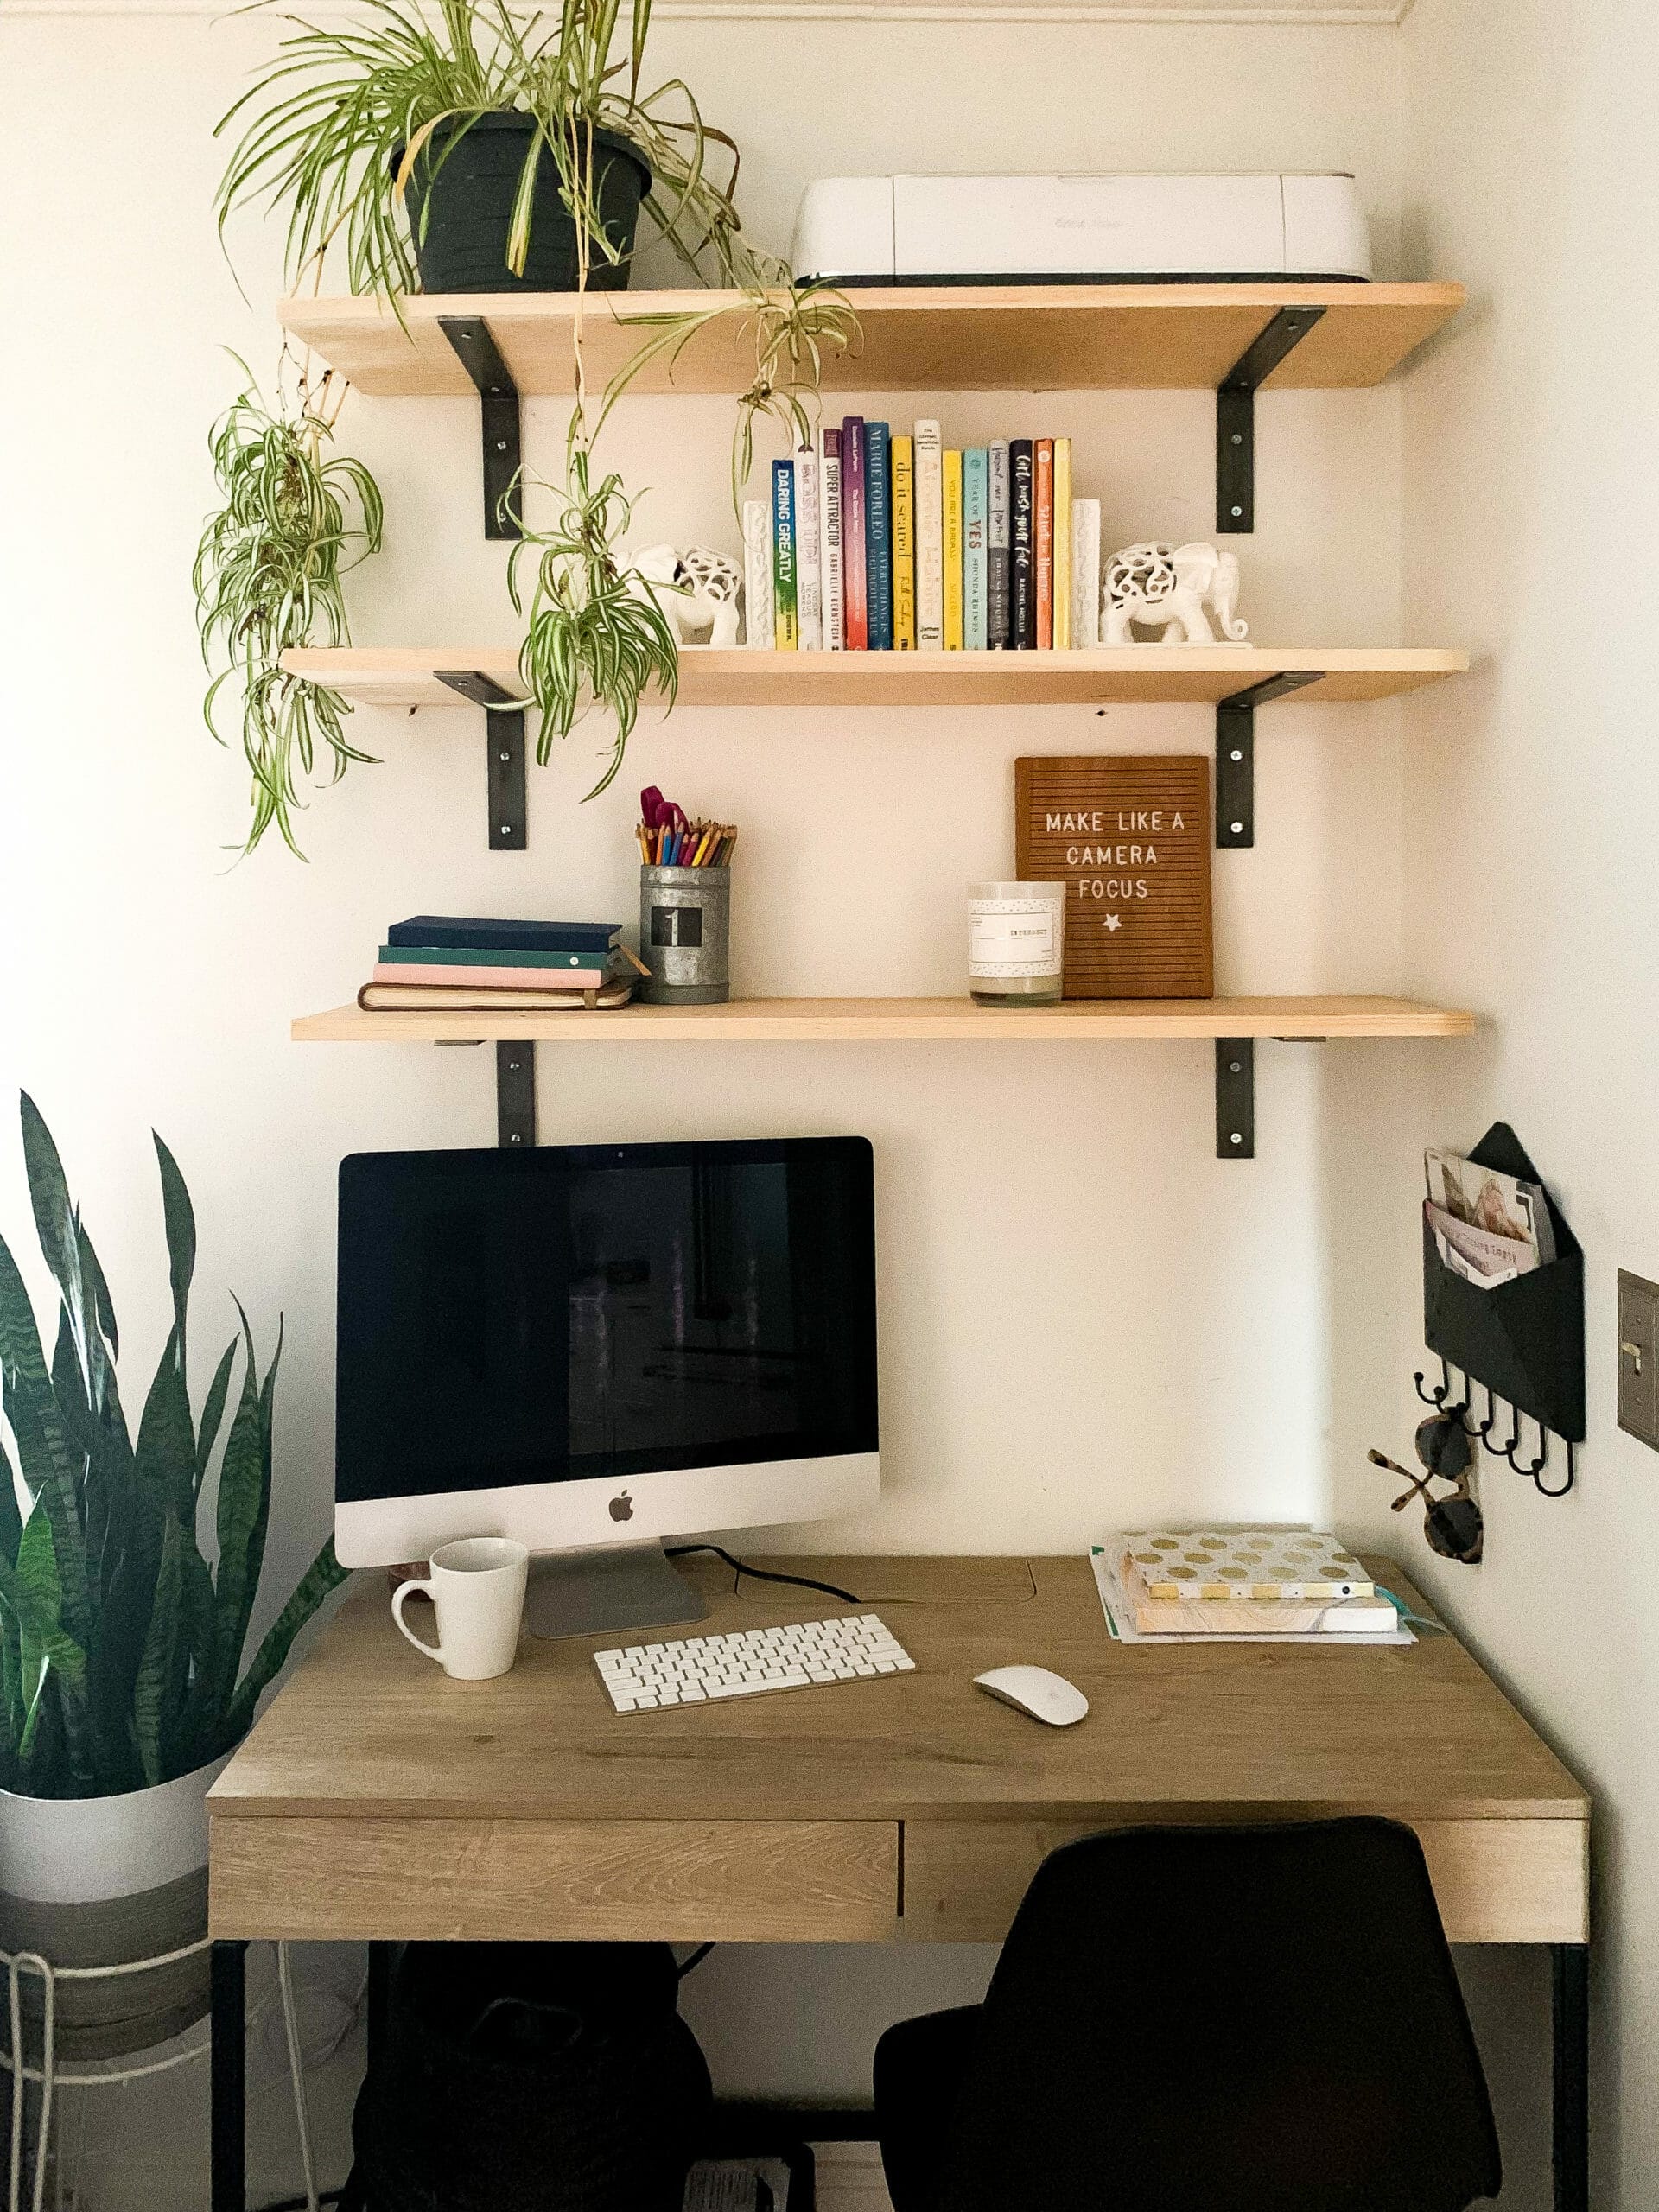 15 Ways to Design a Chic but Functional Home Office